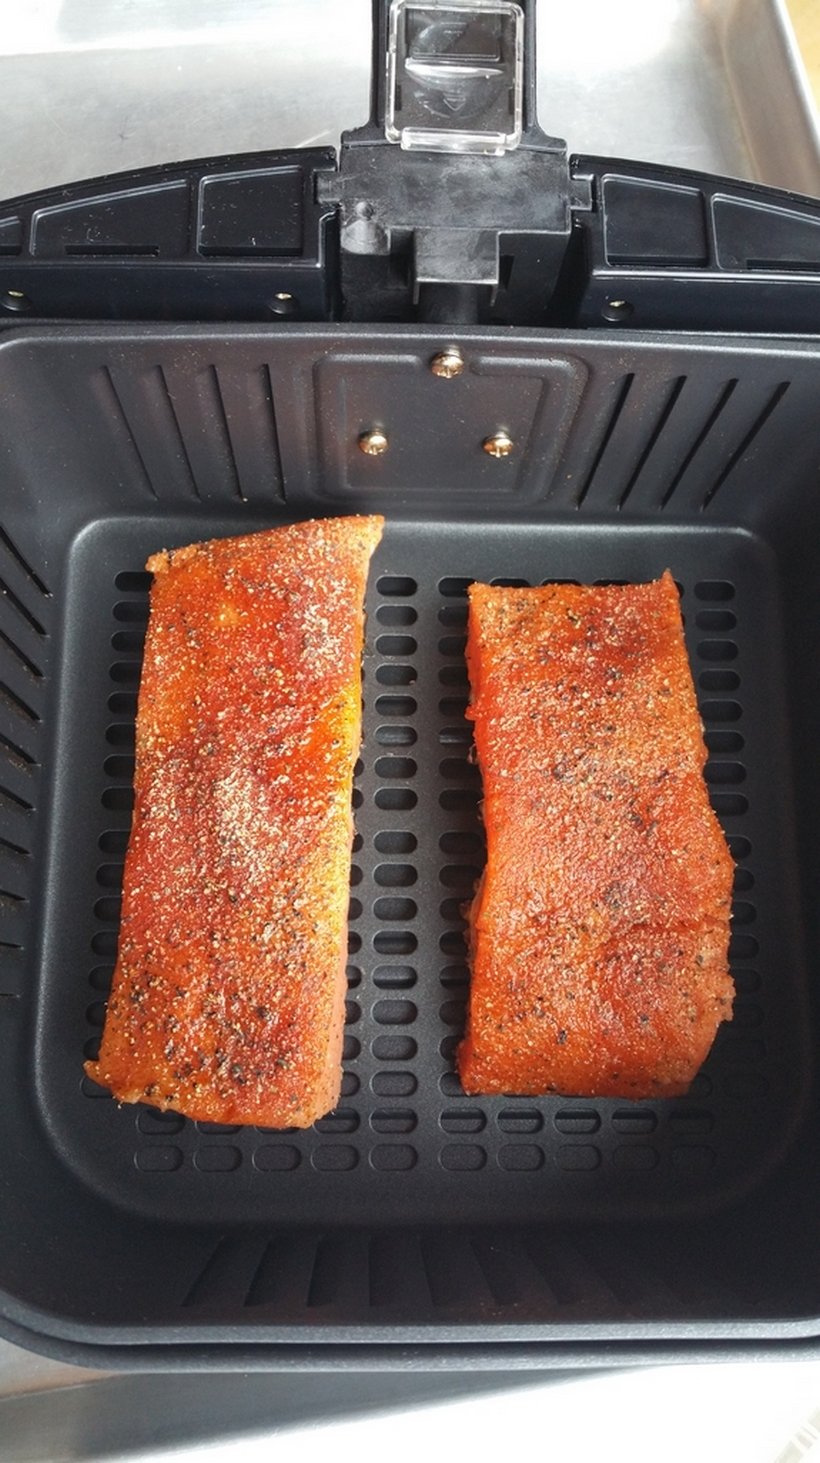 Two pieces of raw salmon in the basket of an air fryer.